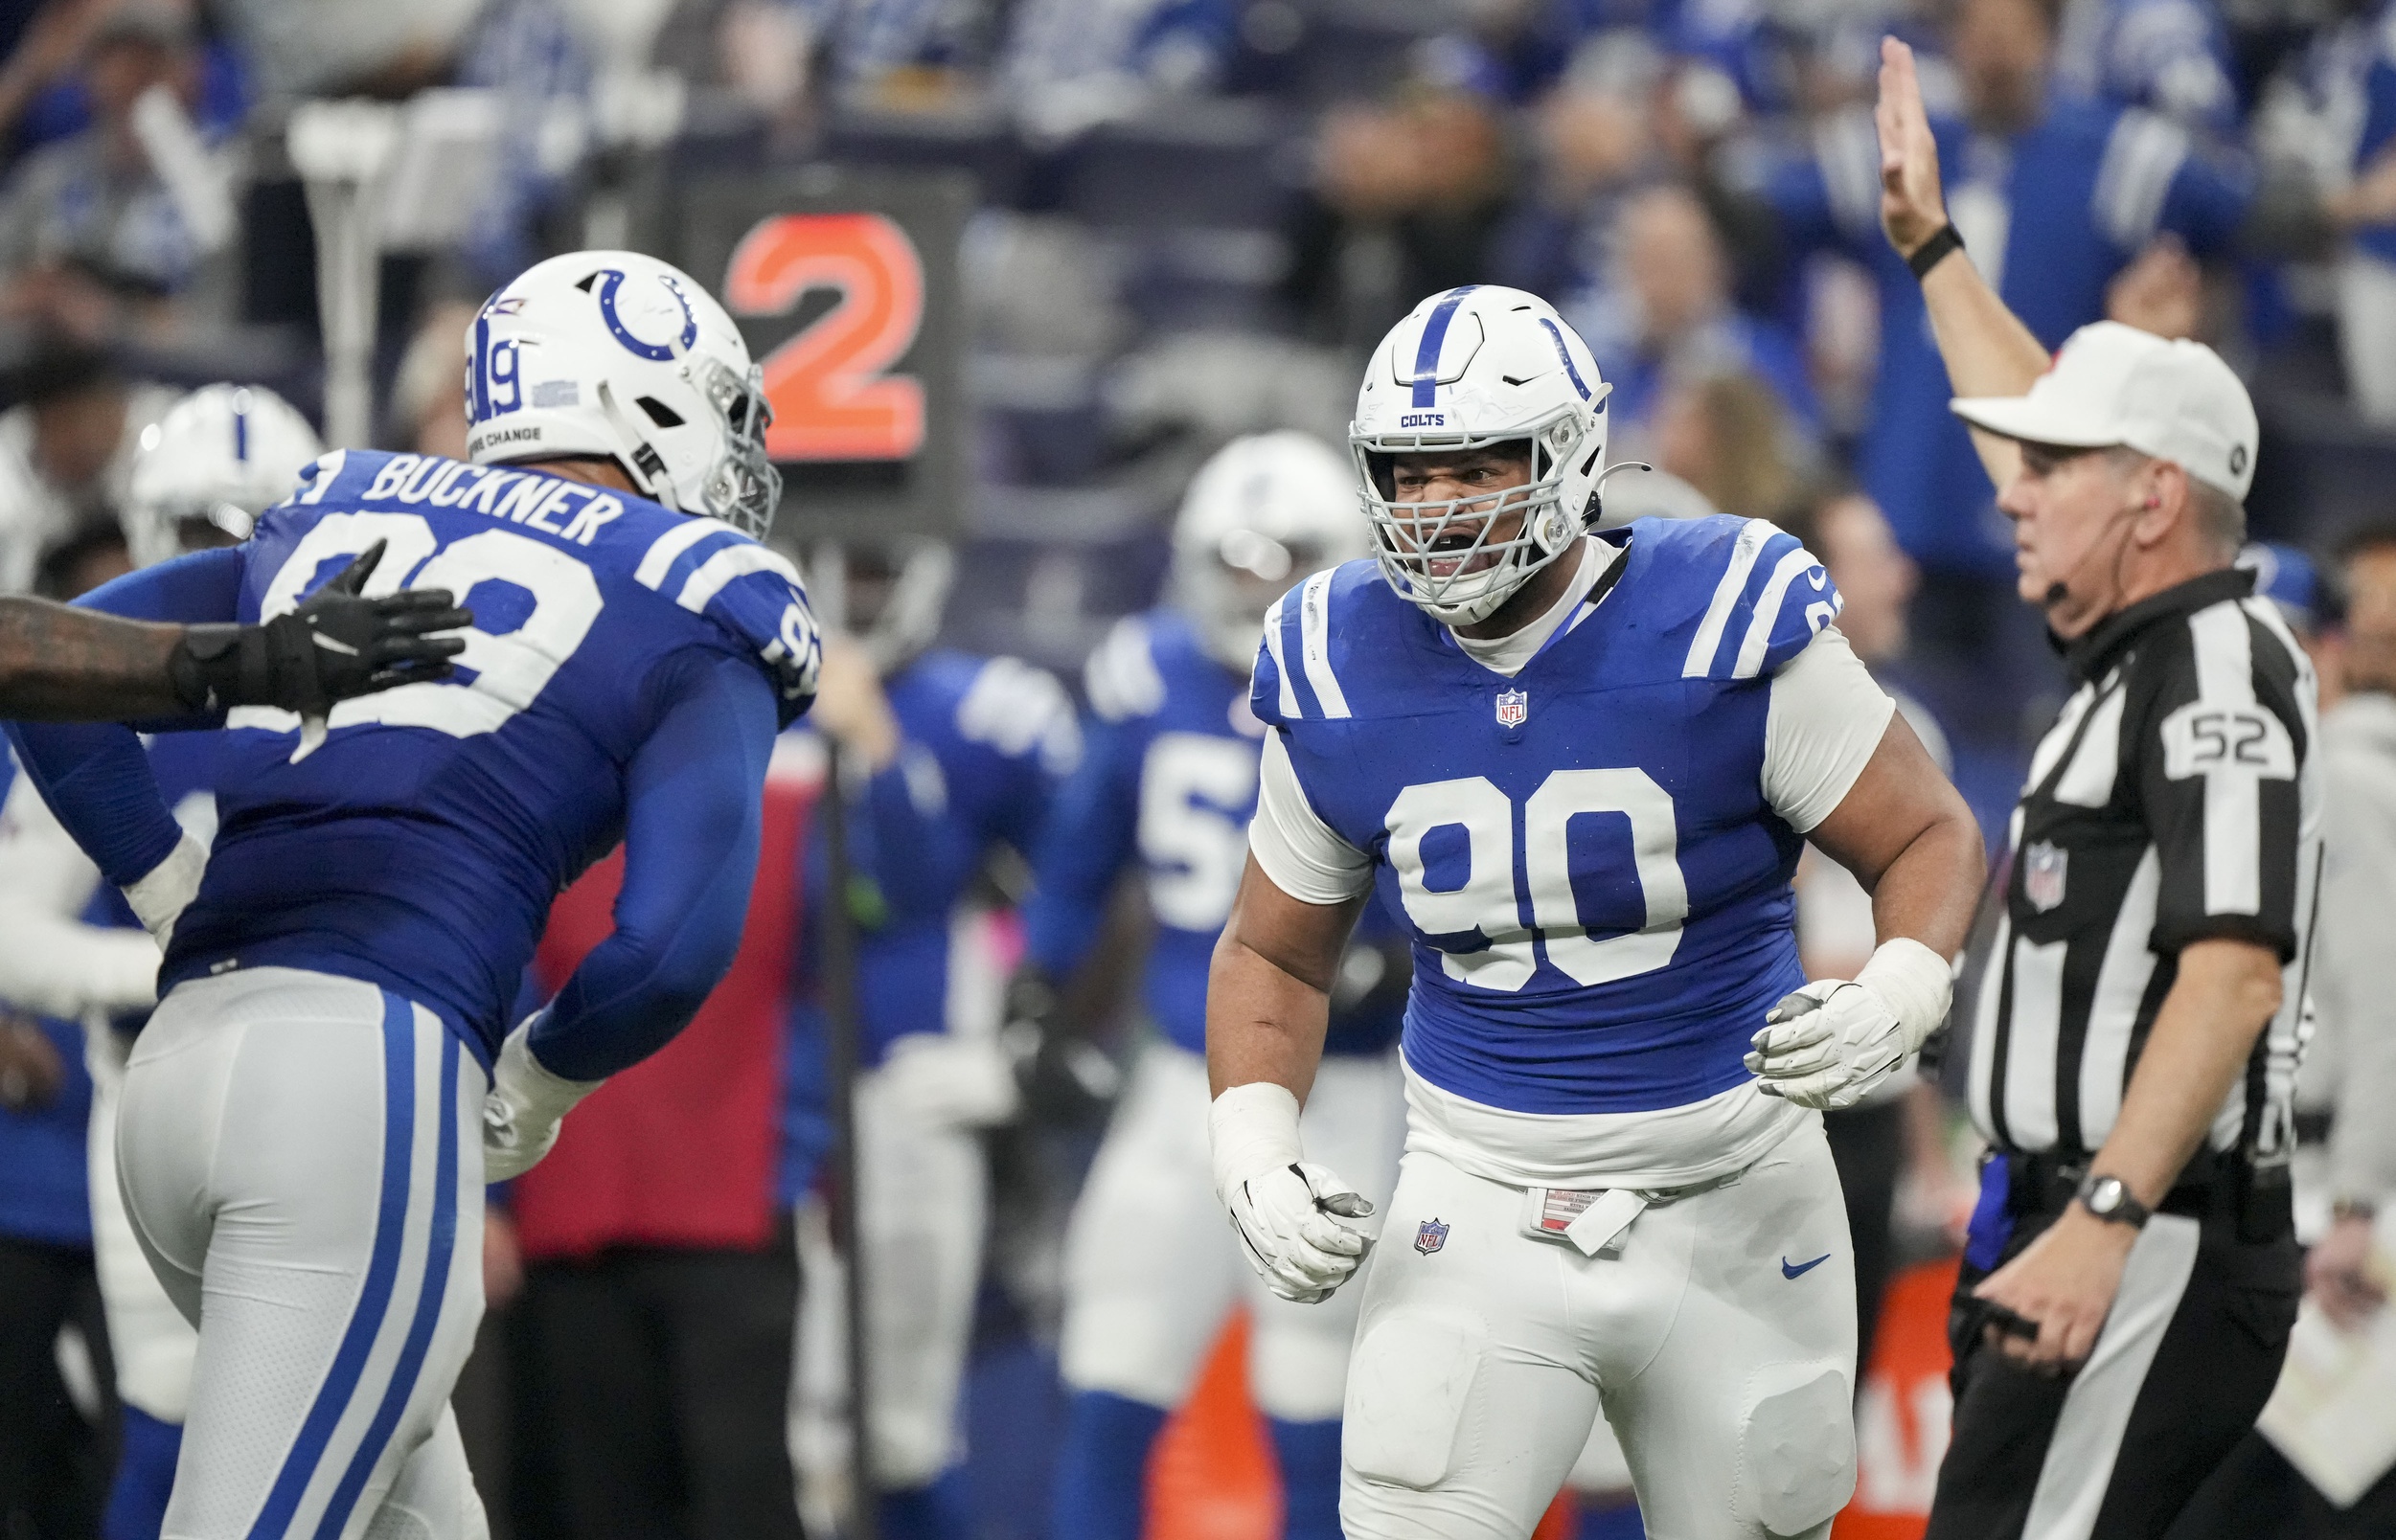 Why the Colts Must Keep This Defensive Tackle - Last Word on Pro